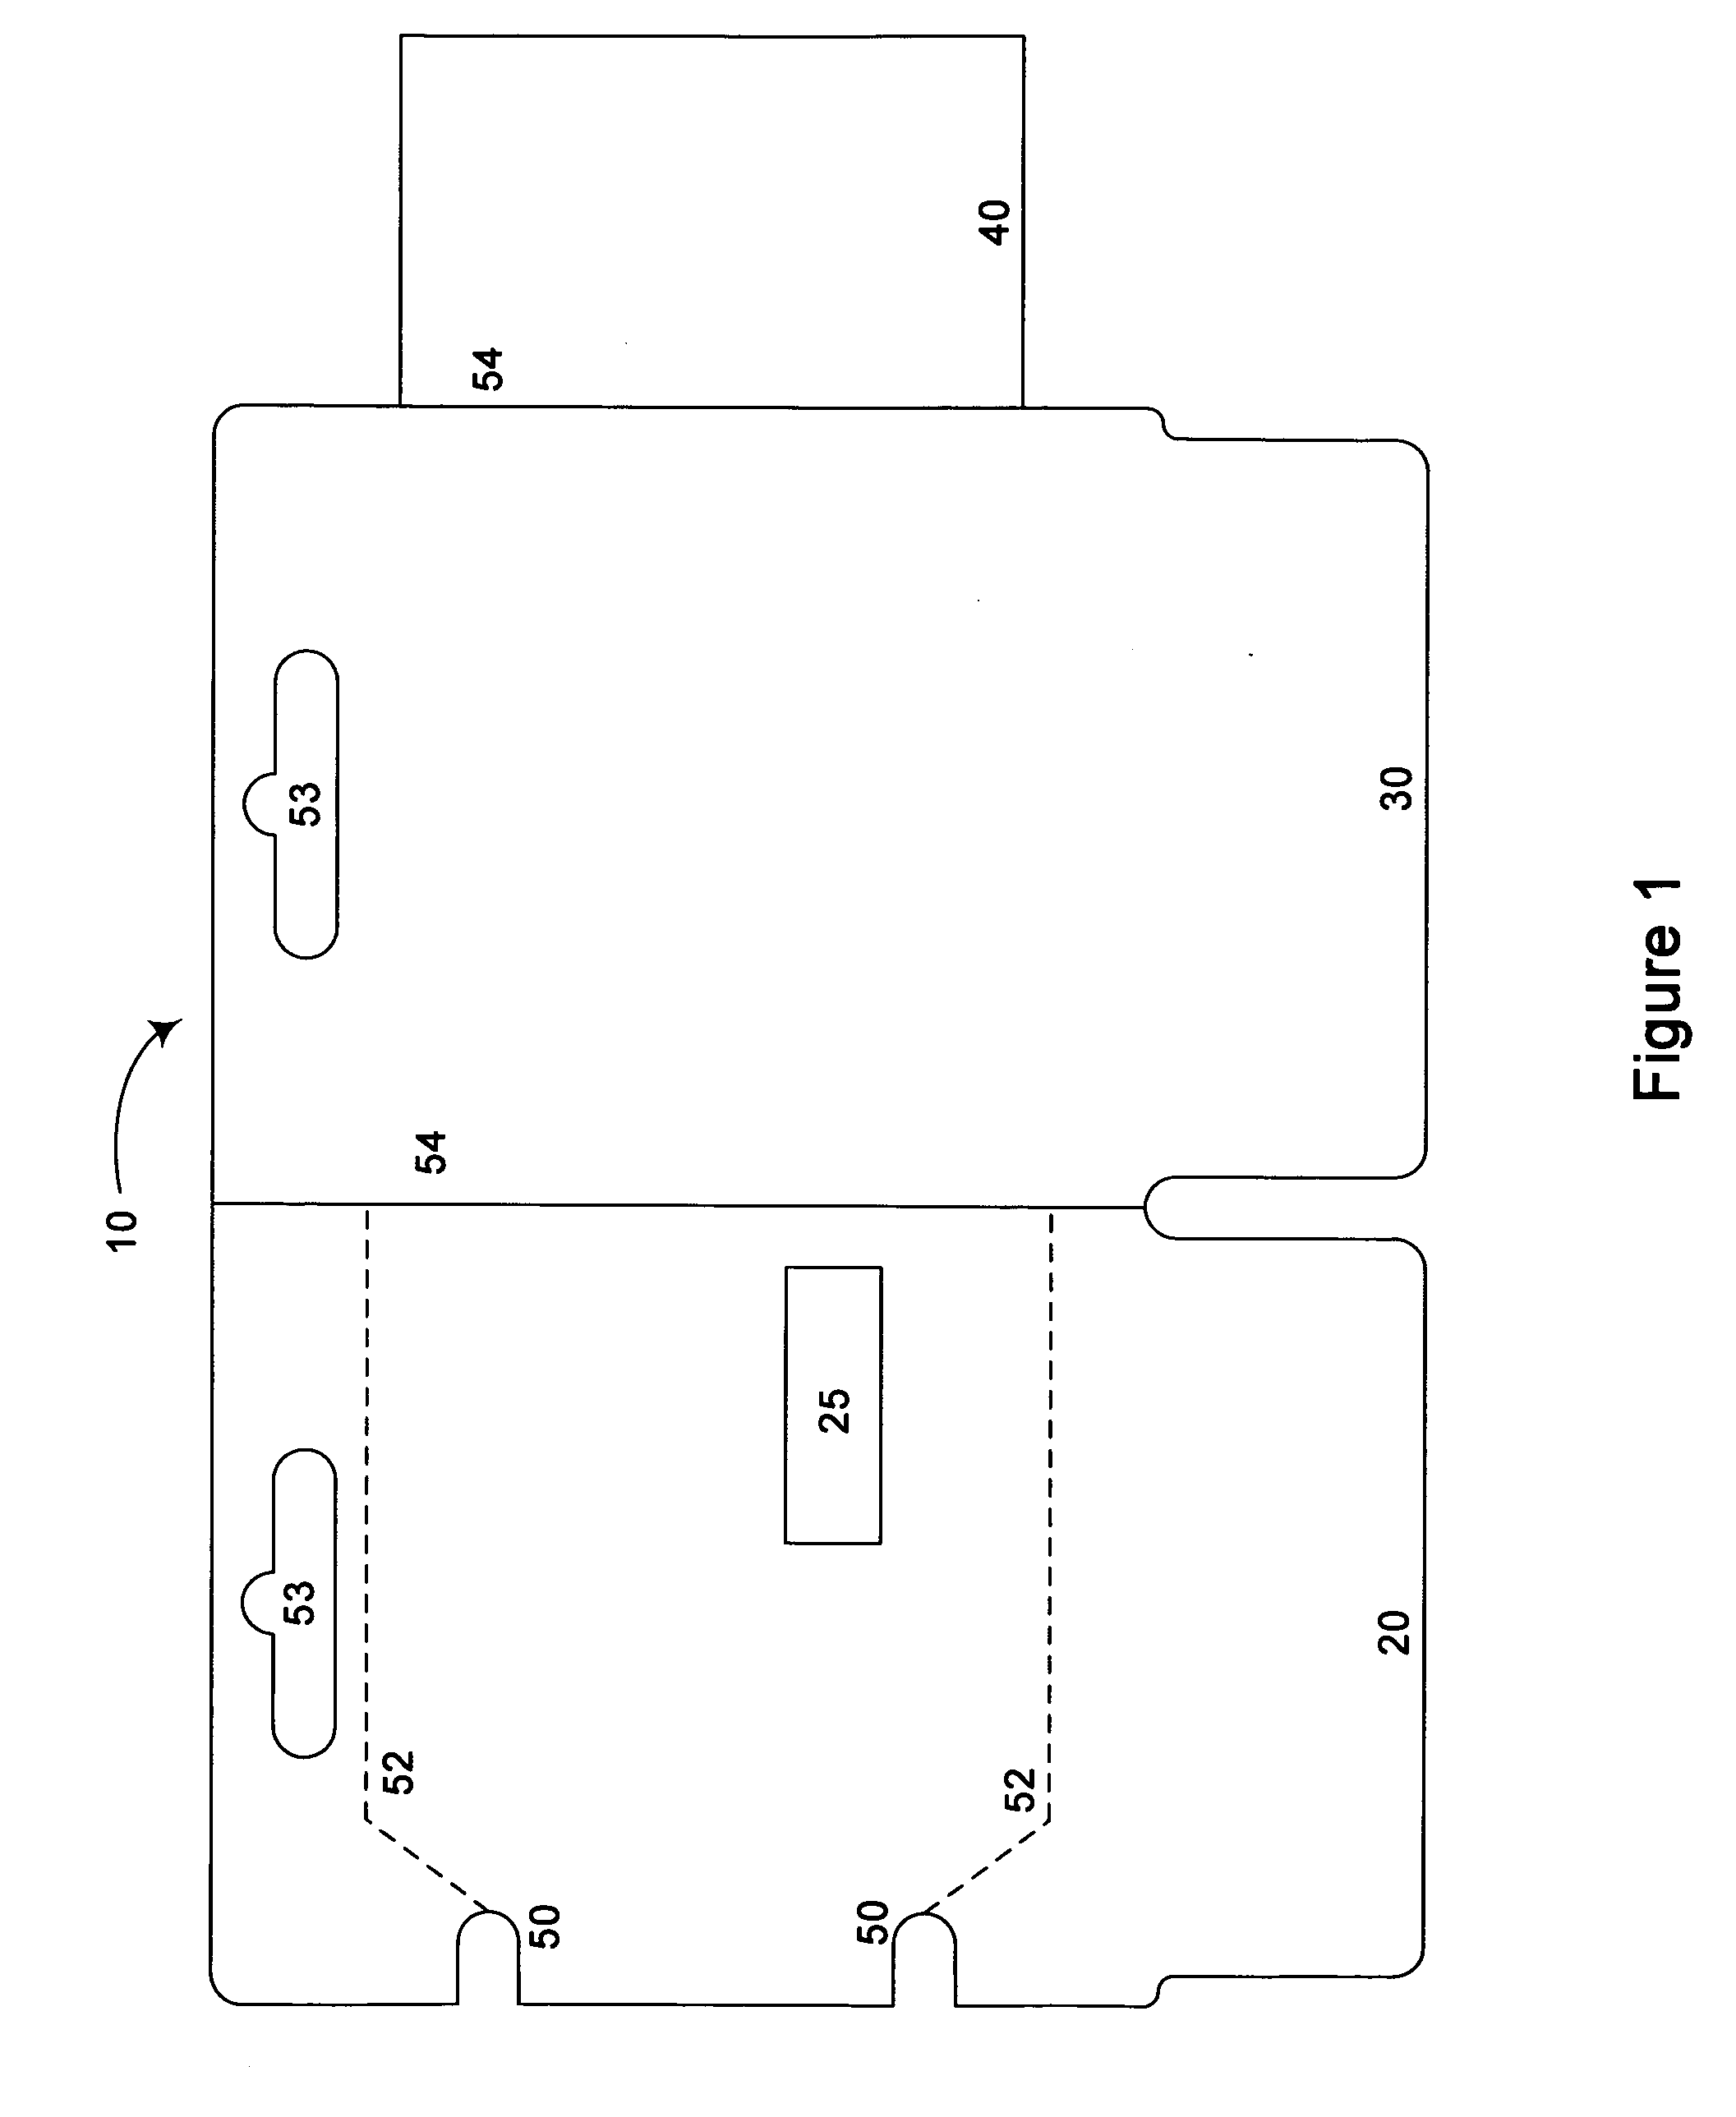 Foldable data card assembly and method